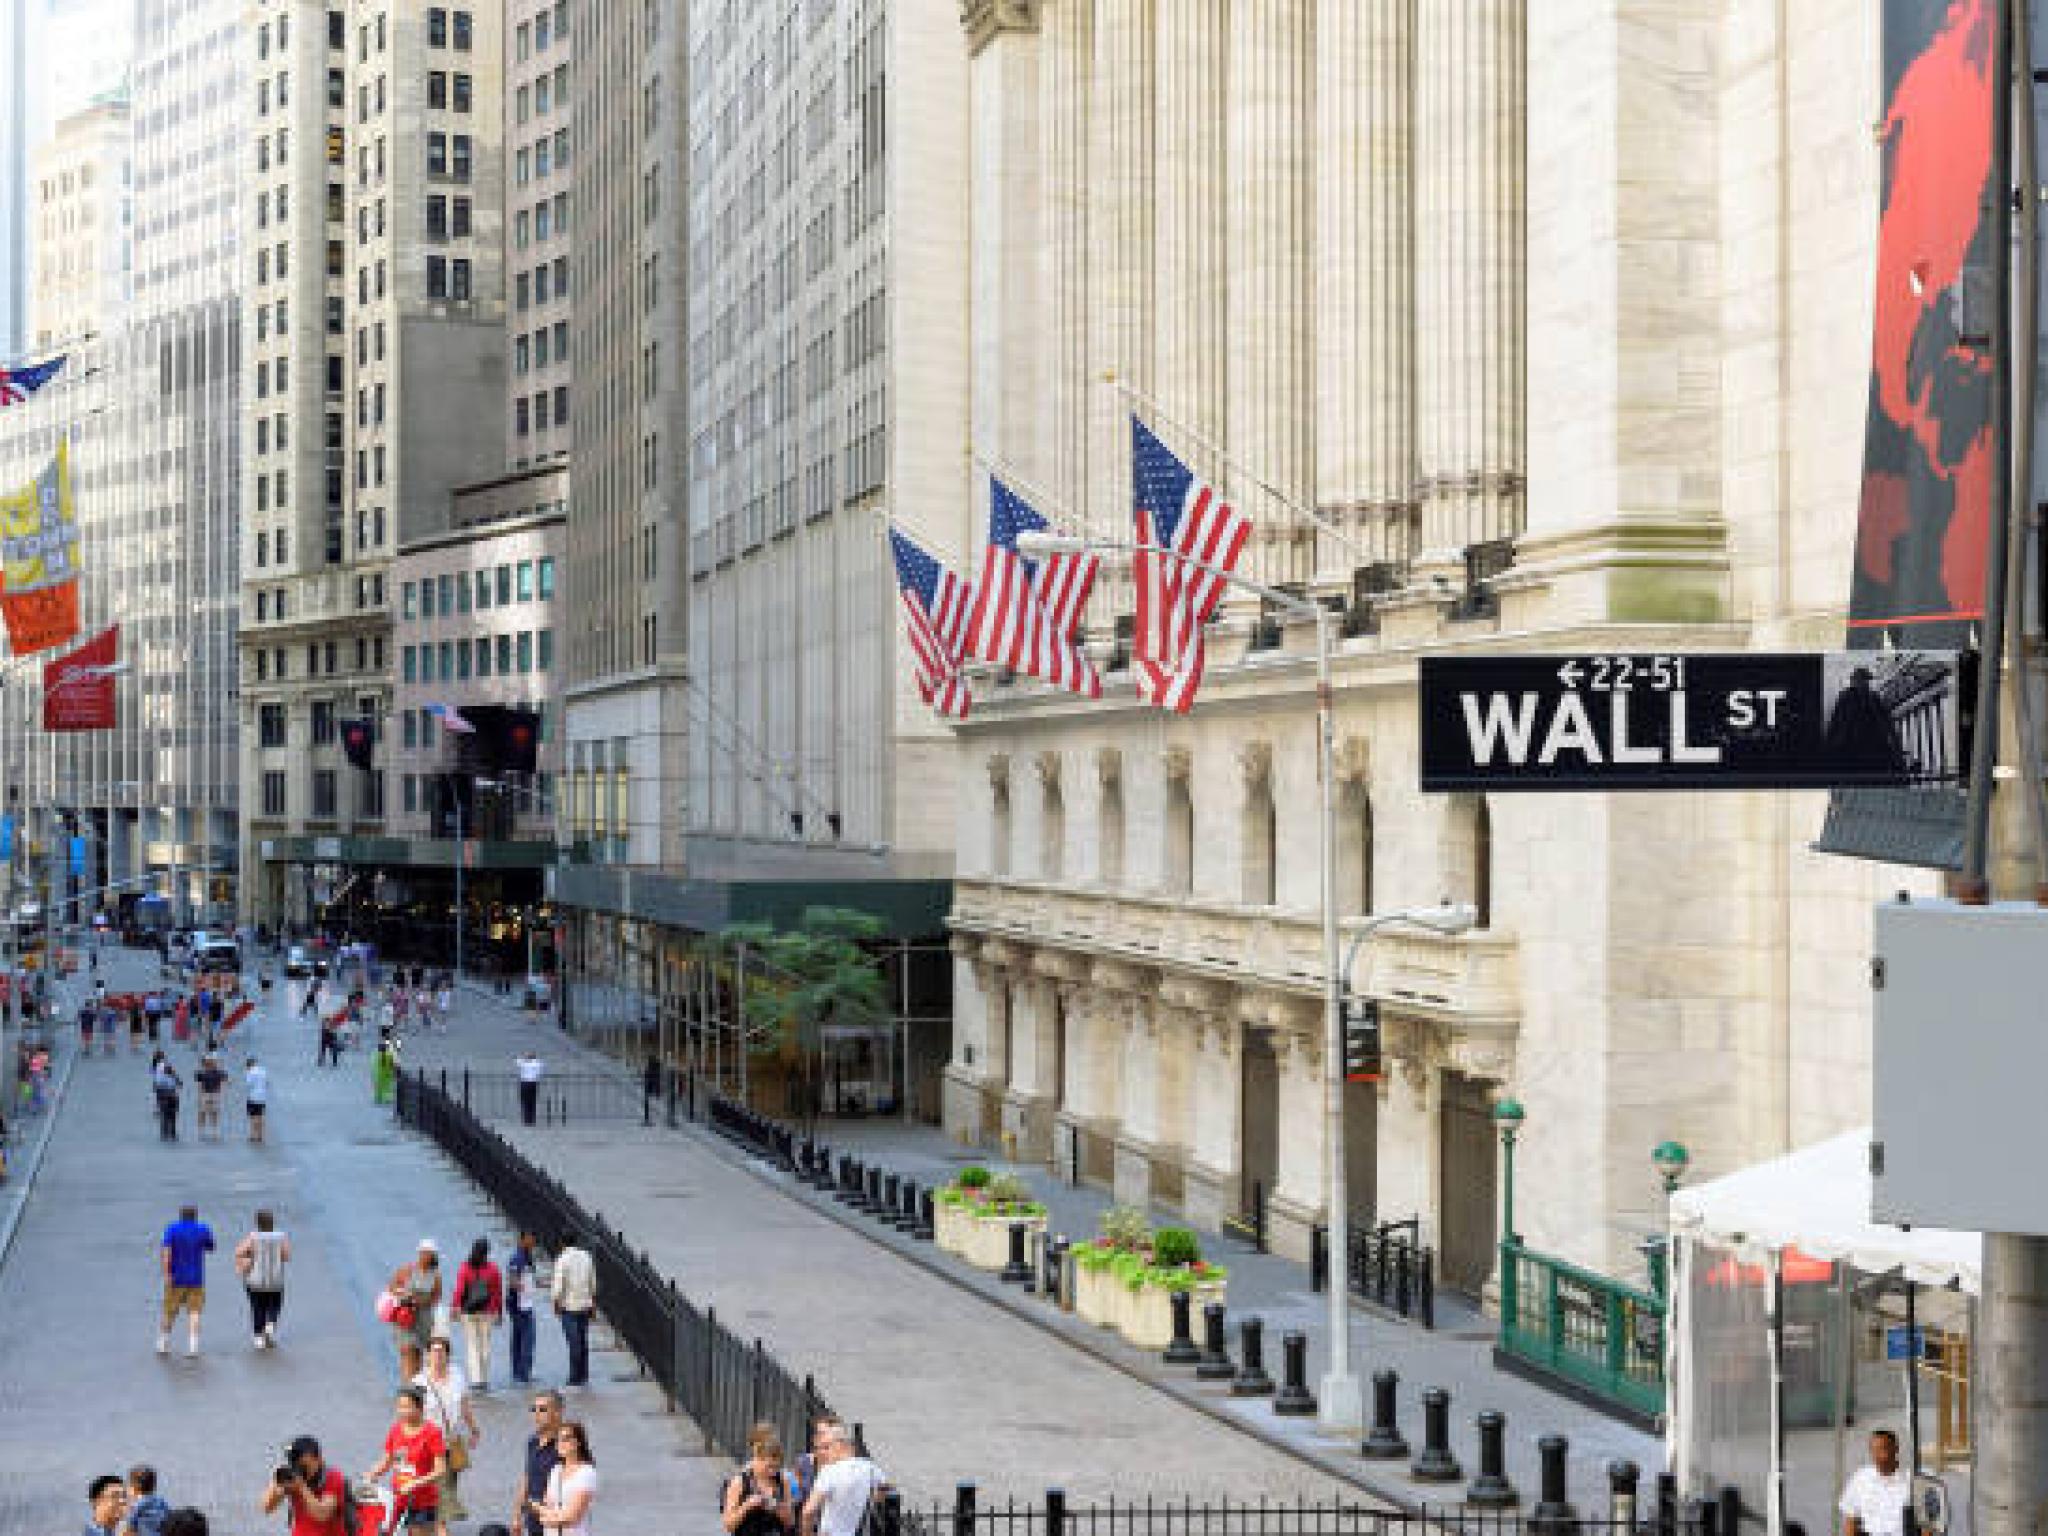  dow-jumps-400-points-us-retail-sales-flat-for-june 